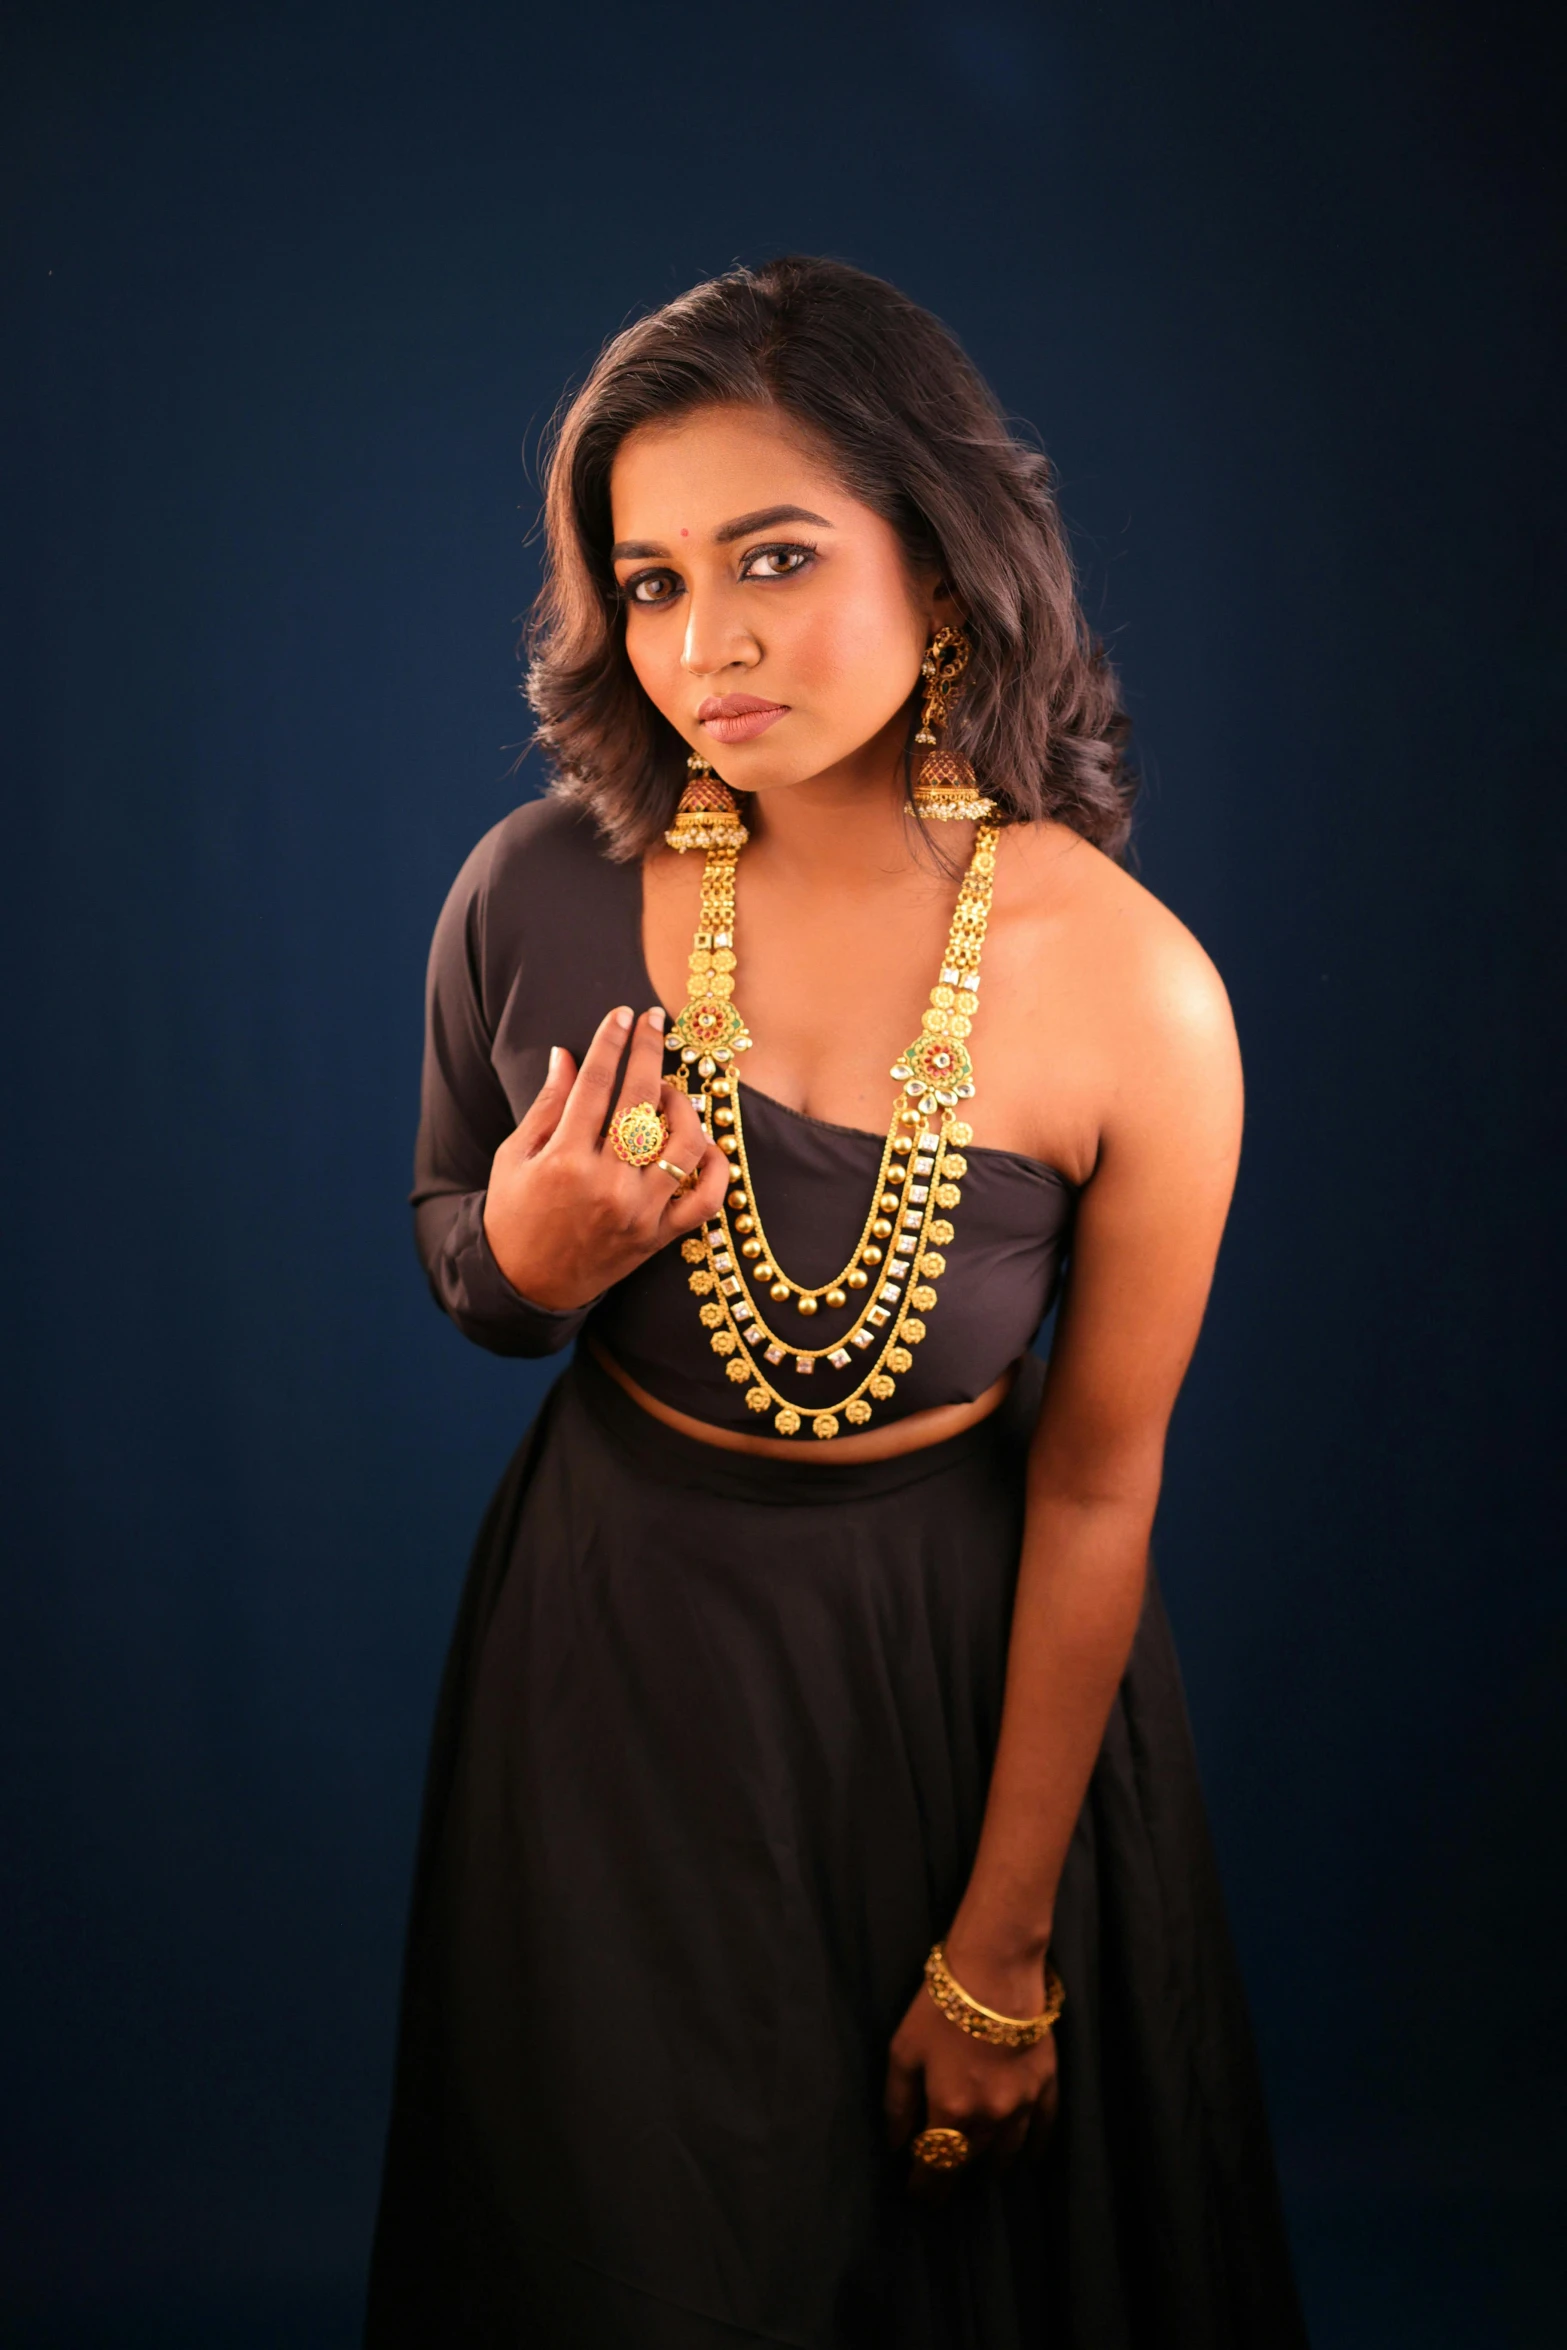 a young woman wearing gold necklaces with a hand holding up a peace sign